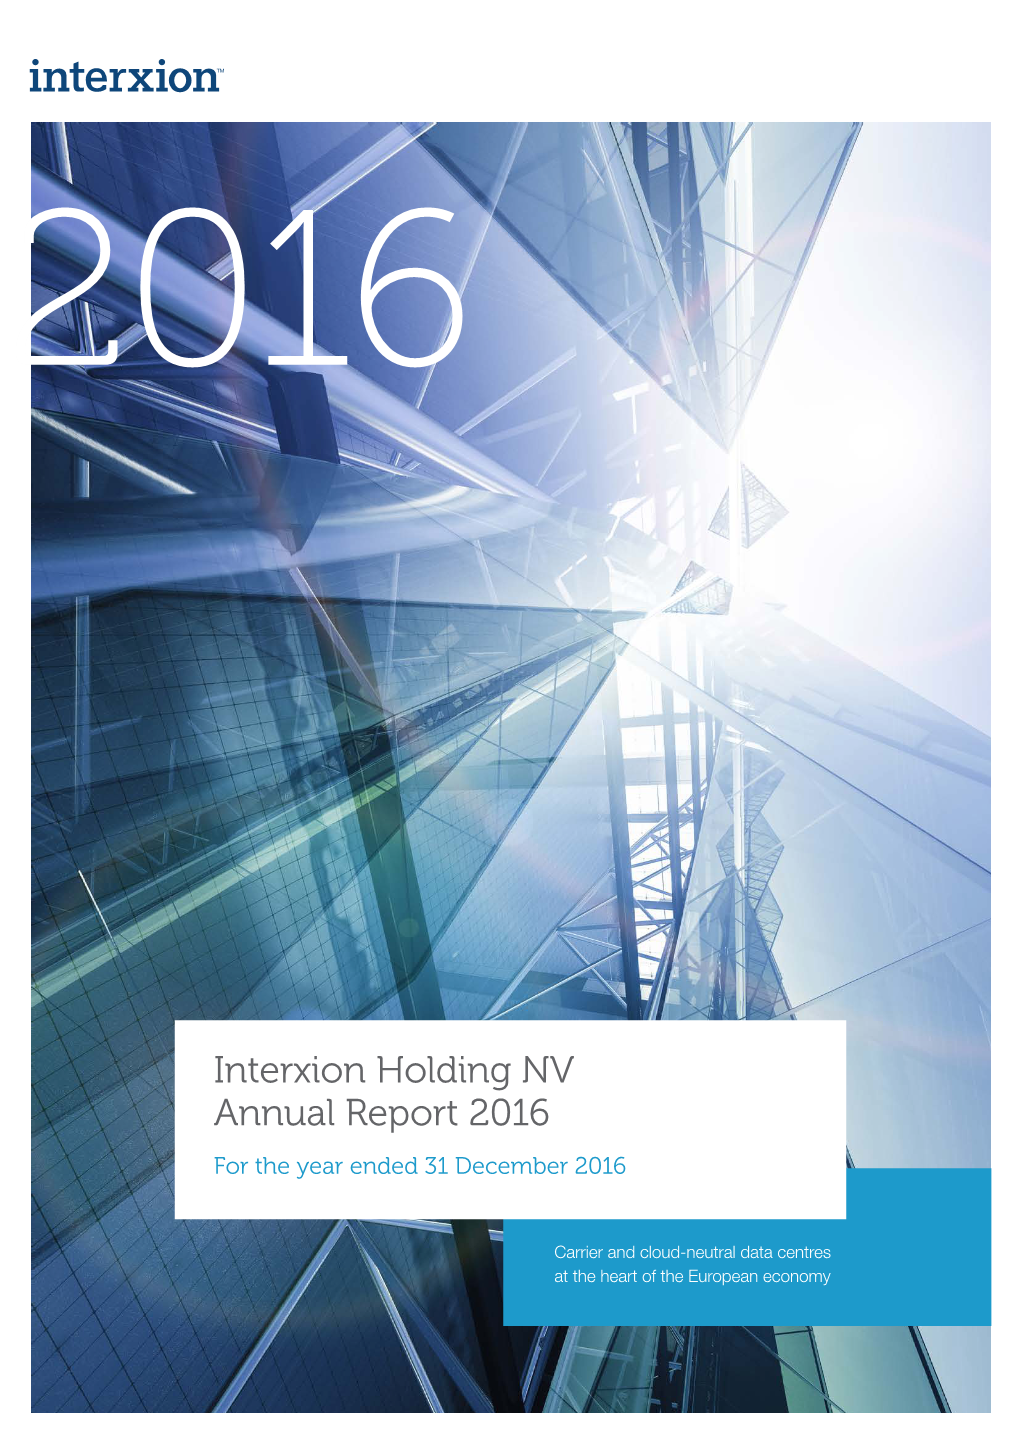 Interxion Holding NV Annual Report 2016 for the Year Ended 31 December 2016